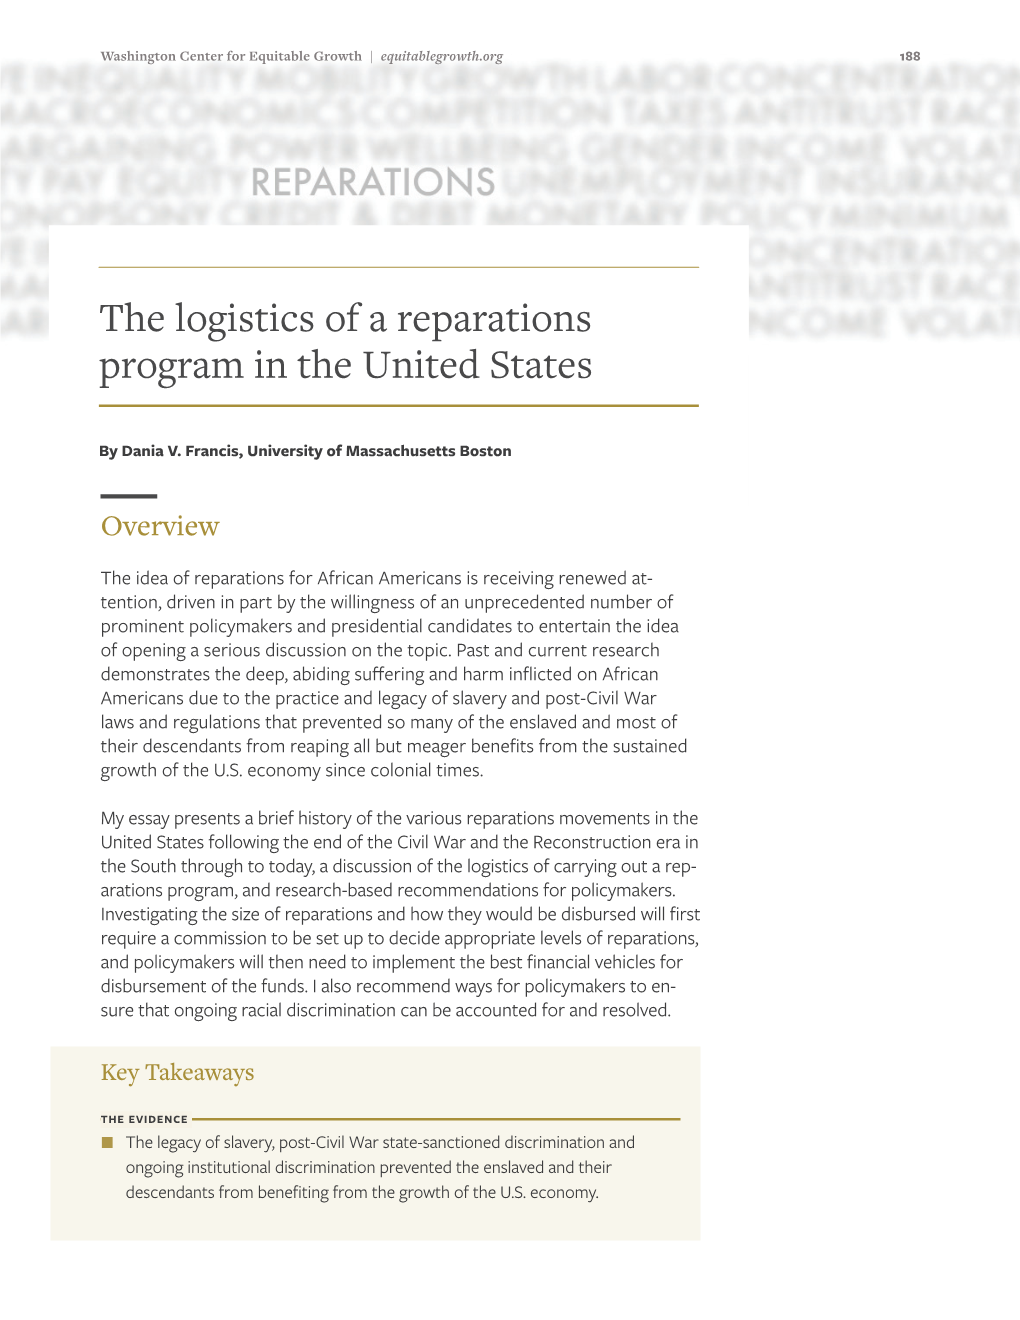 The Logistics of a Reparations Program in the United States